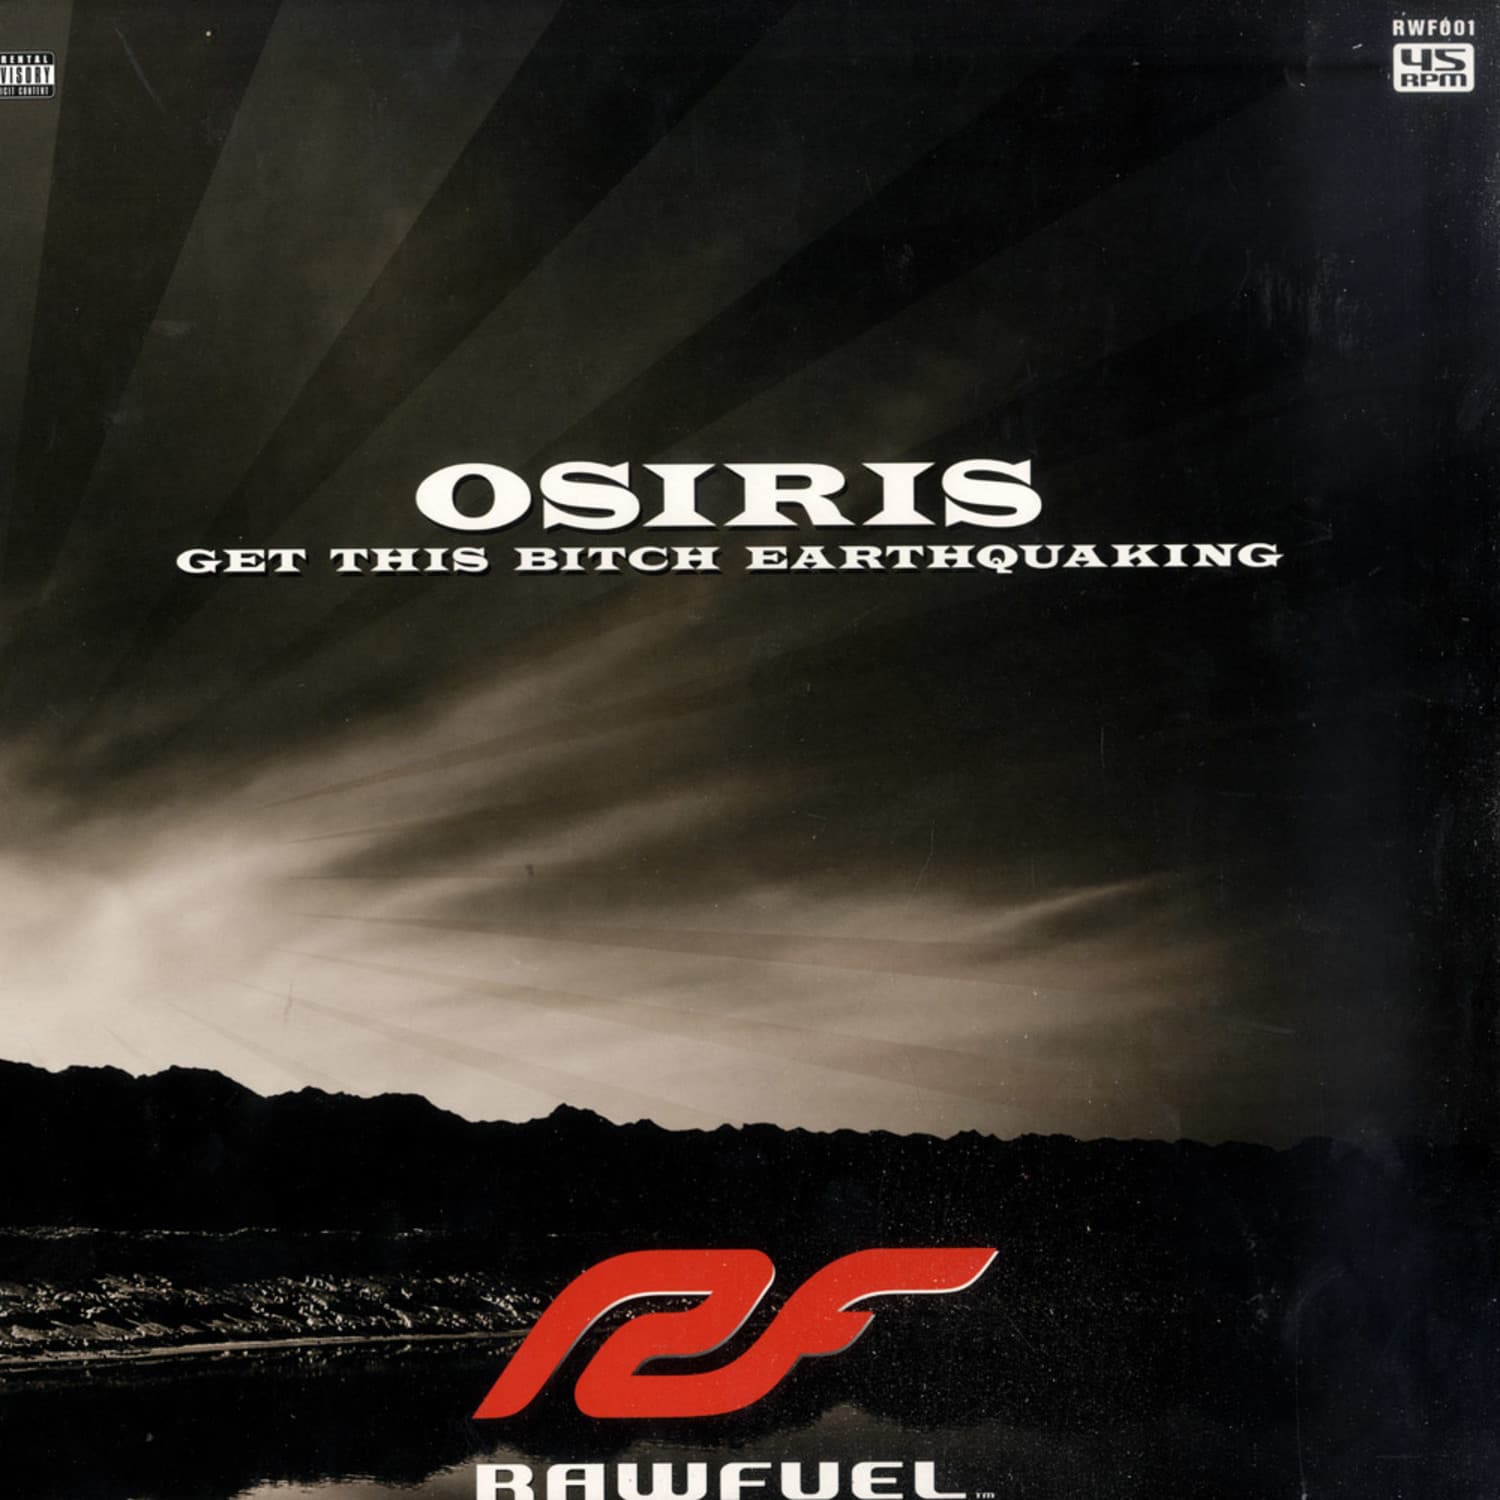 Osiris - GET THIS BITCH EARTHQUAKING